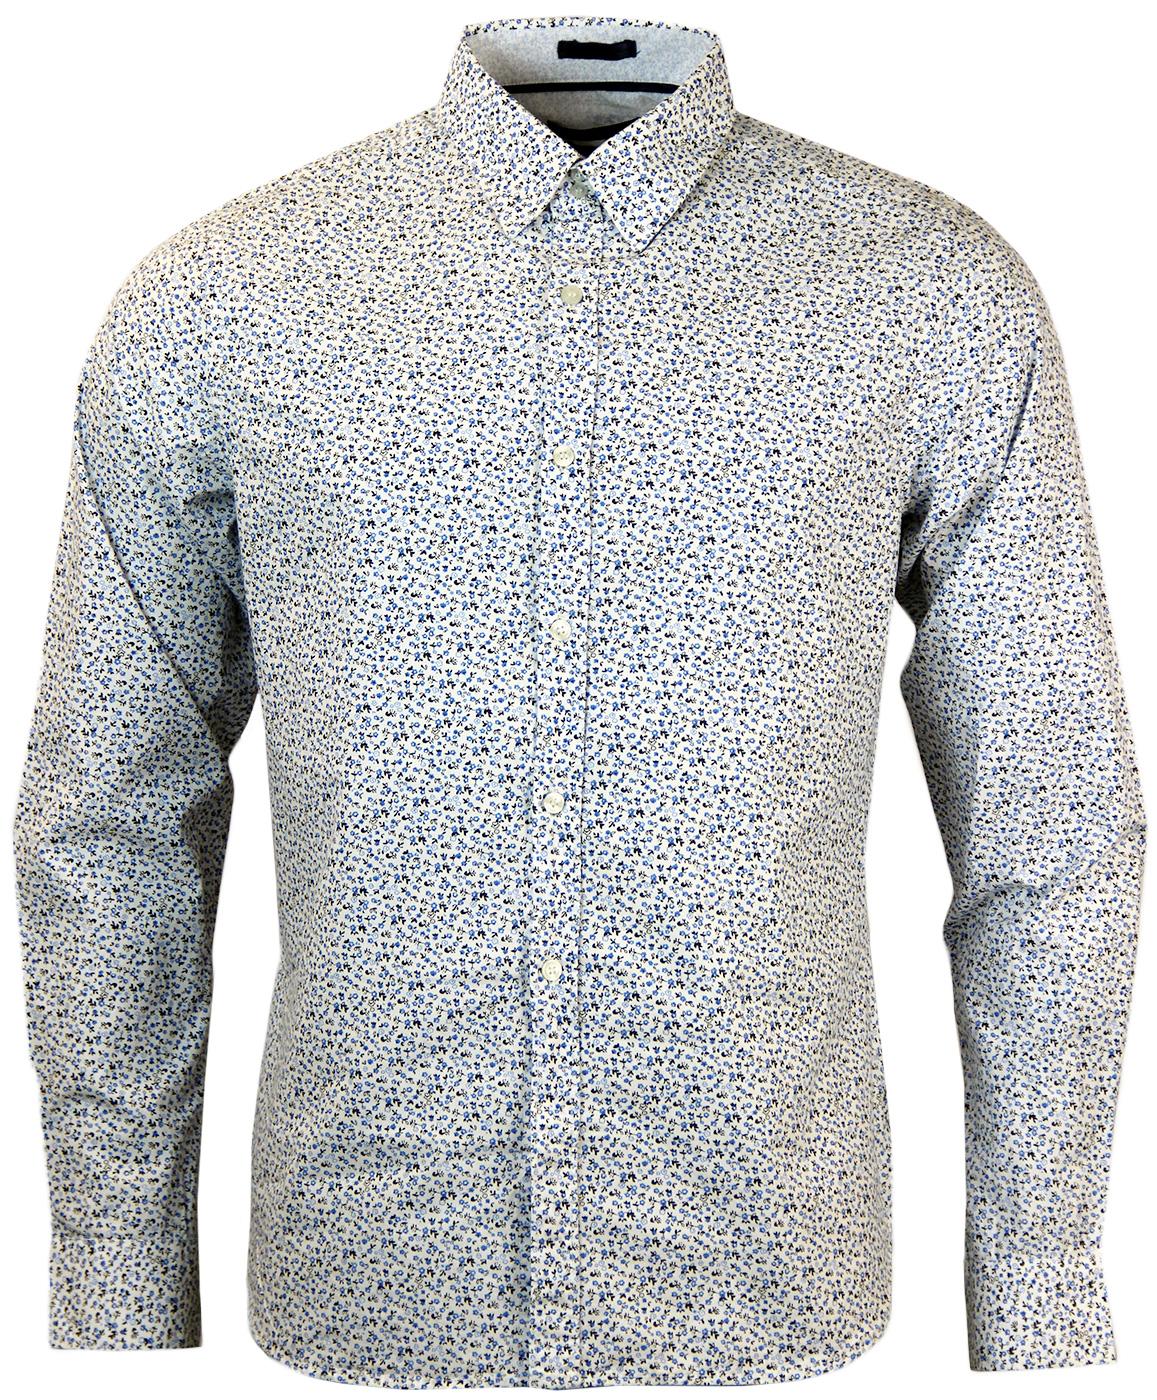 FRENCH CONNECTION Retro Mod 60s Mini Floral Shirt